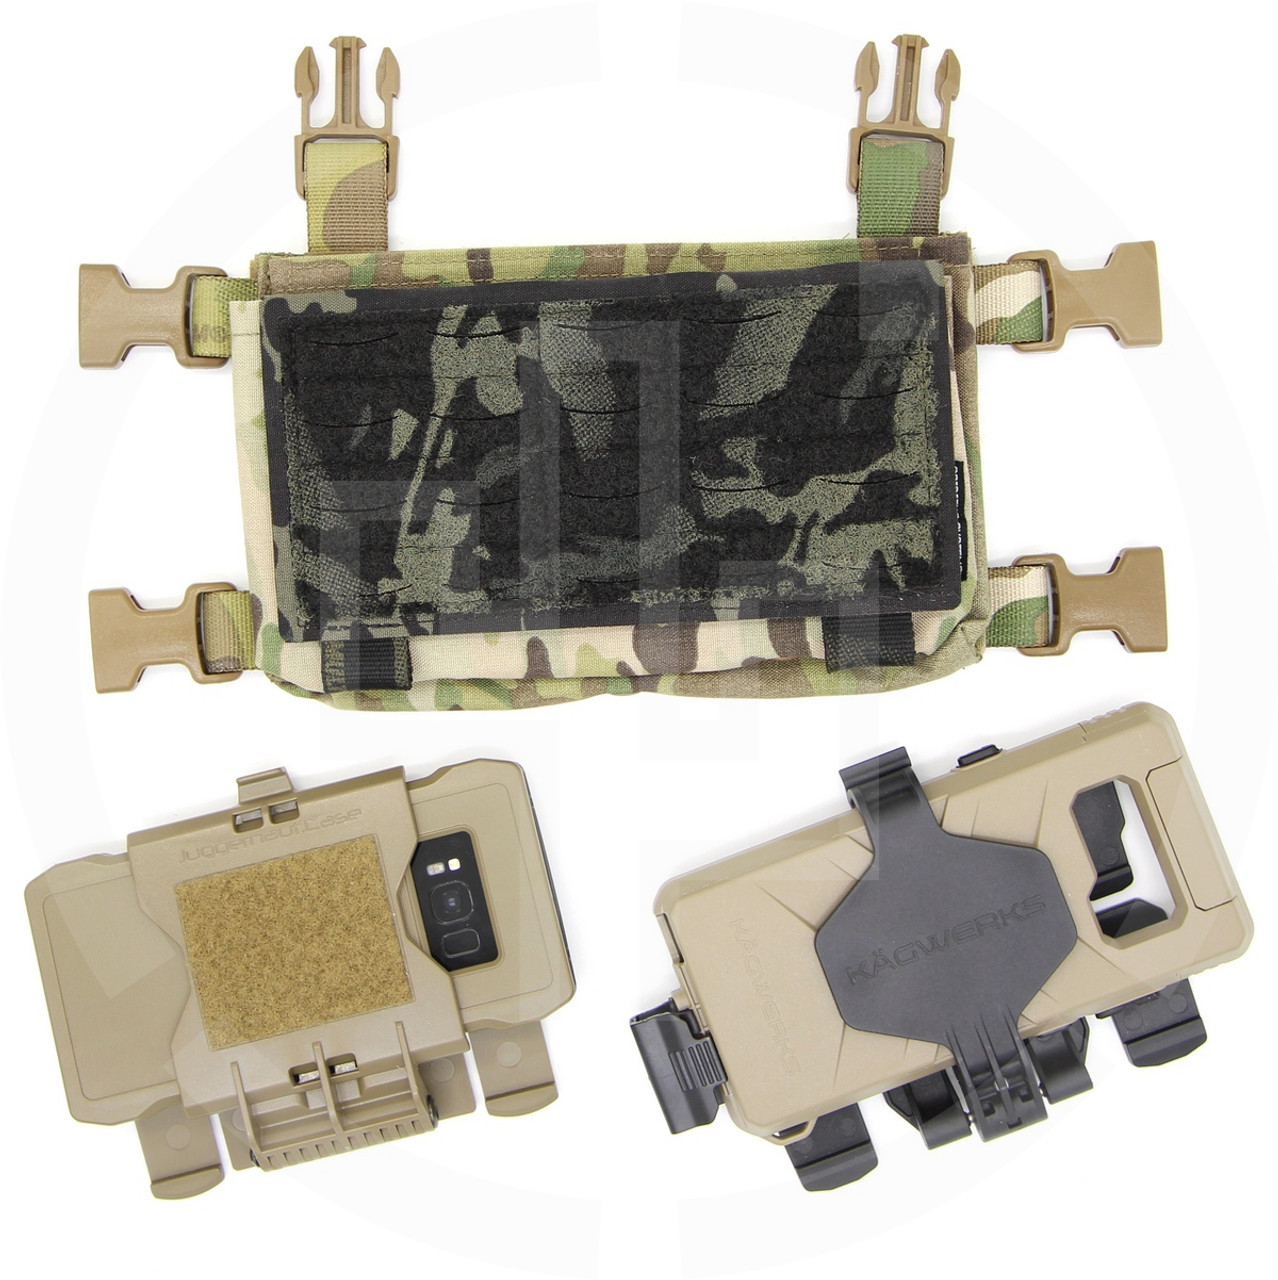 WTF Front PALS Panel for Spiritus Systems MFCR Micro Fight Chest Rig ...